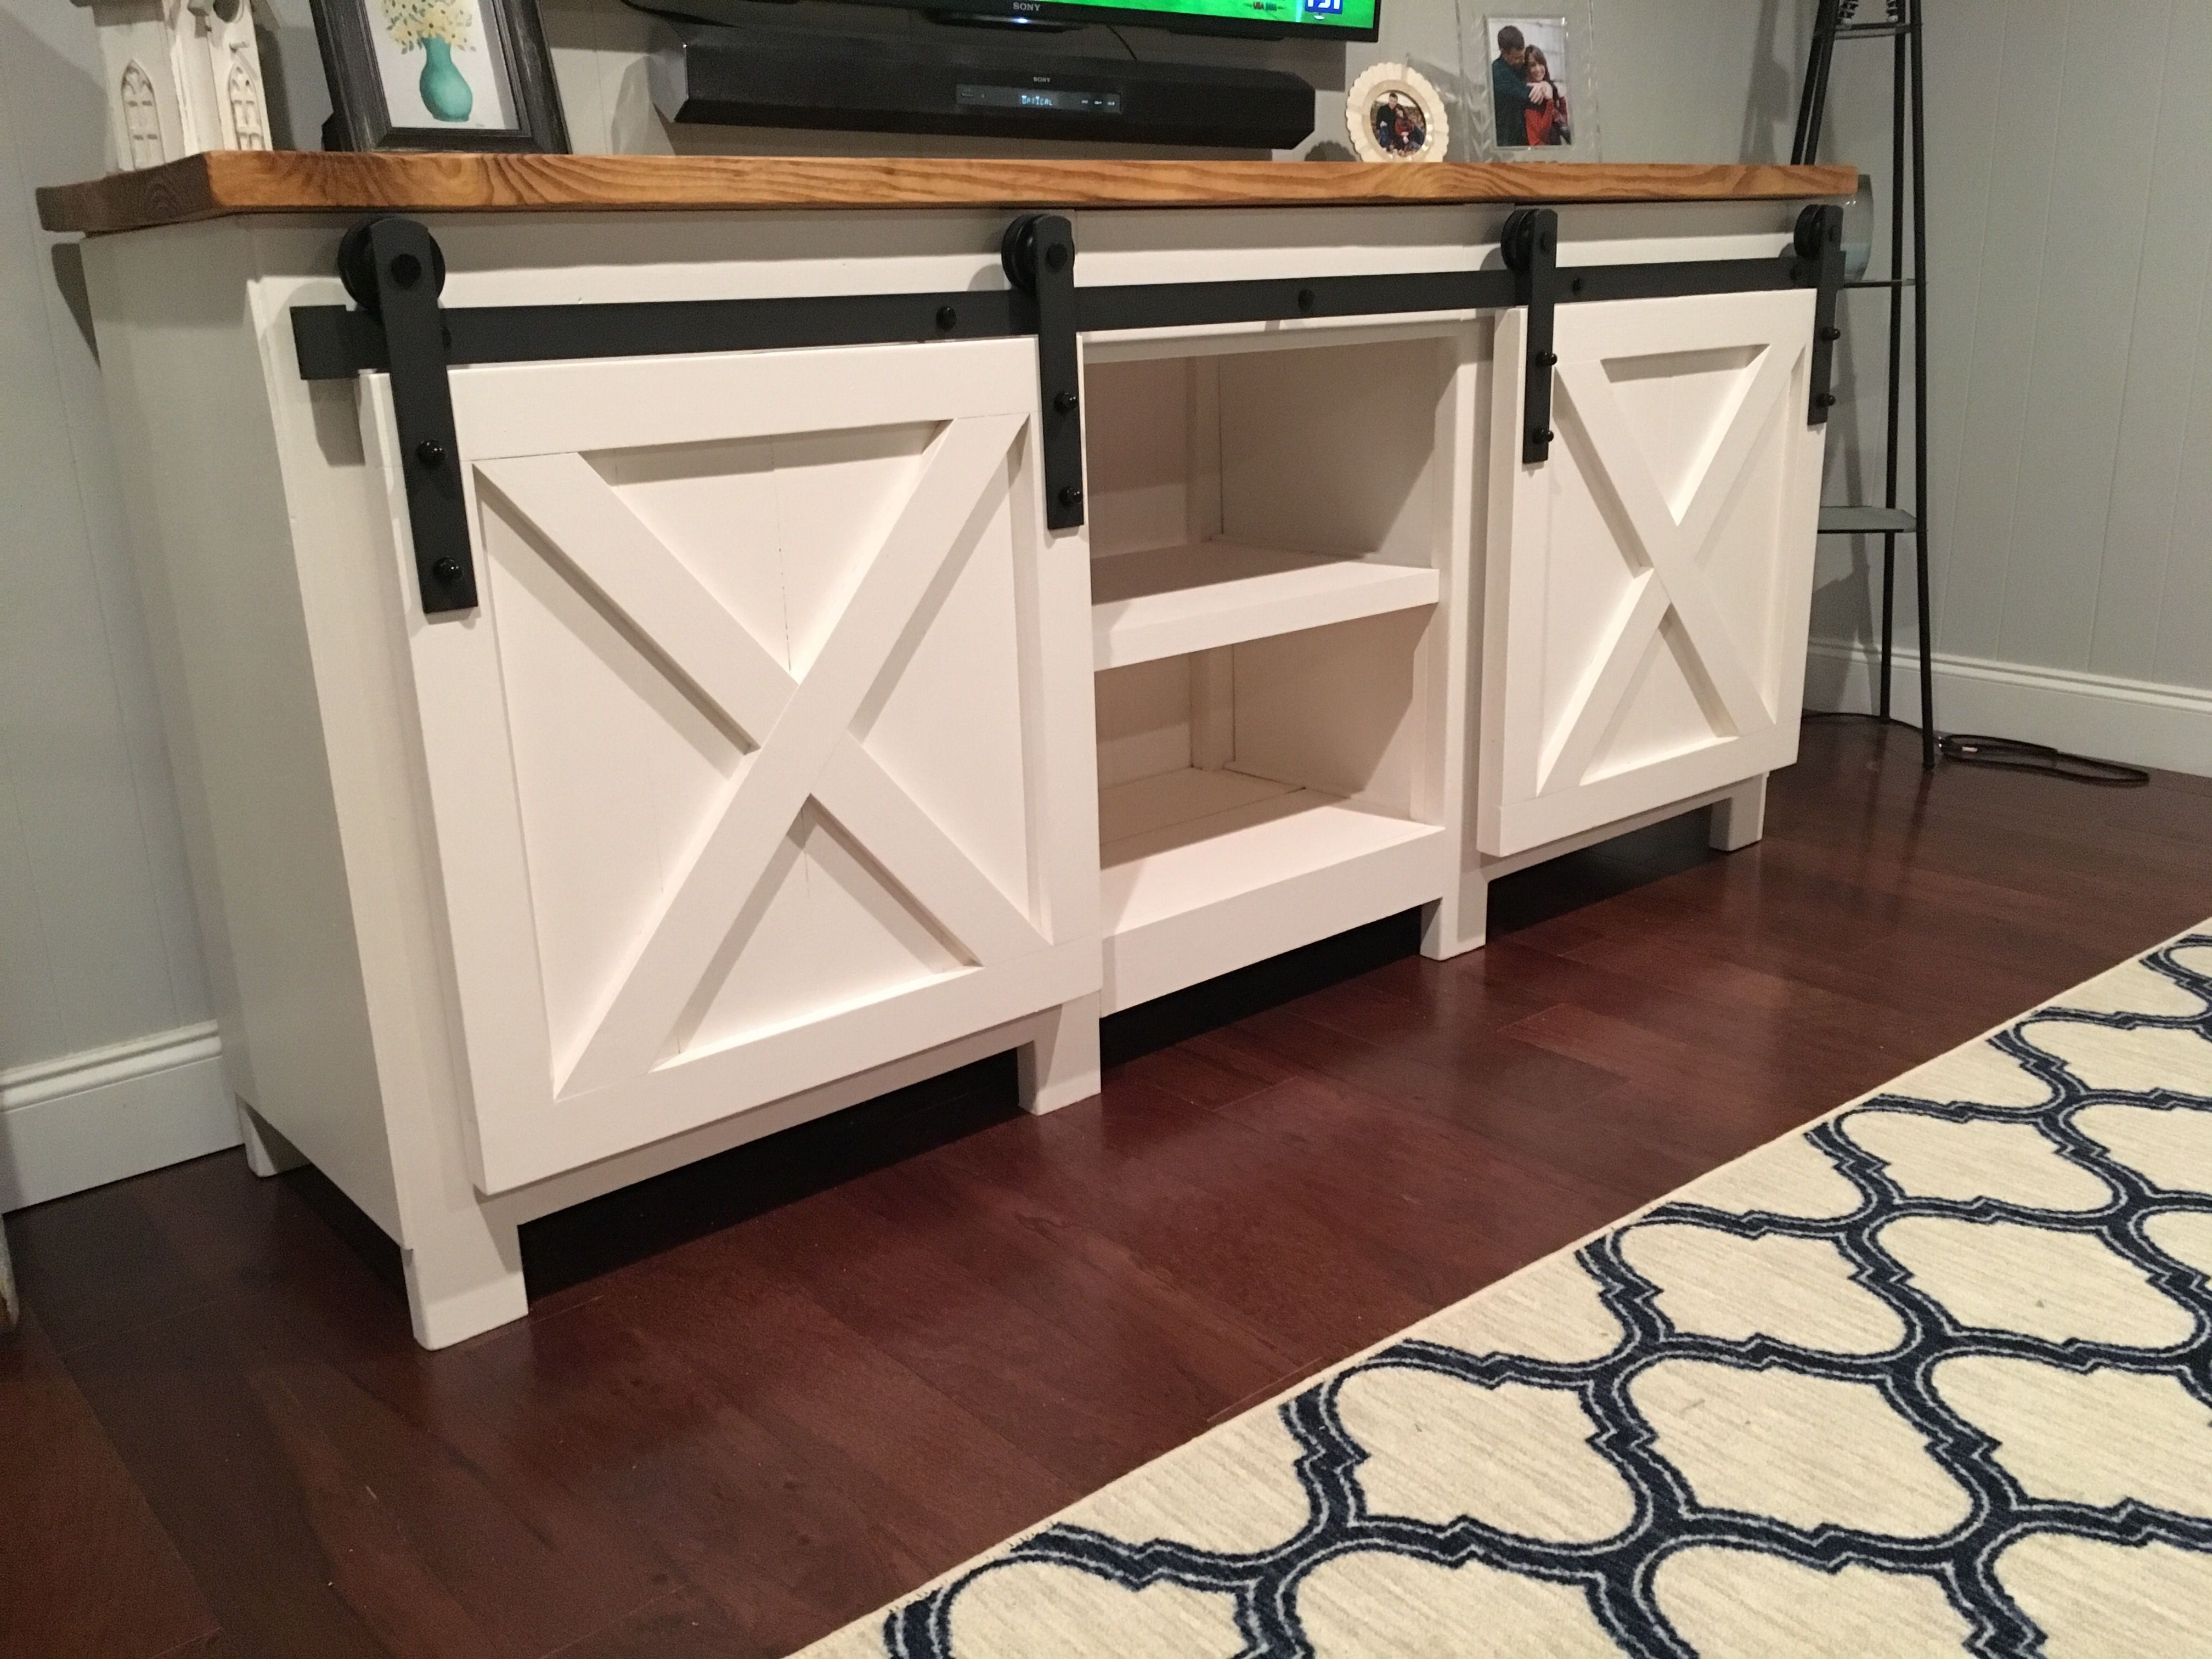 free diy stand plans you can build right now ana accent table with barn door doors and shelves white designer chairs sears outdoor furniture best coffee designs black side